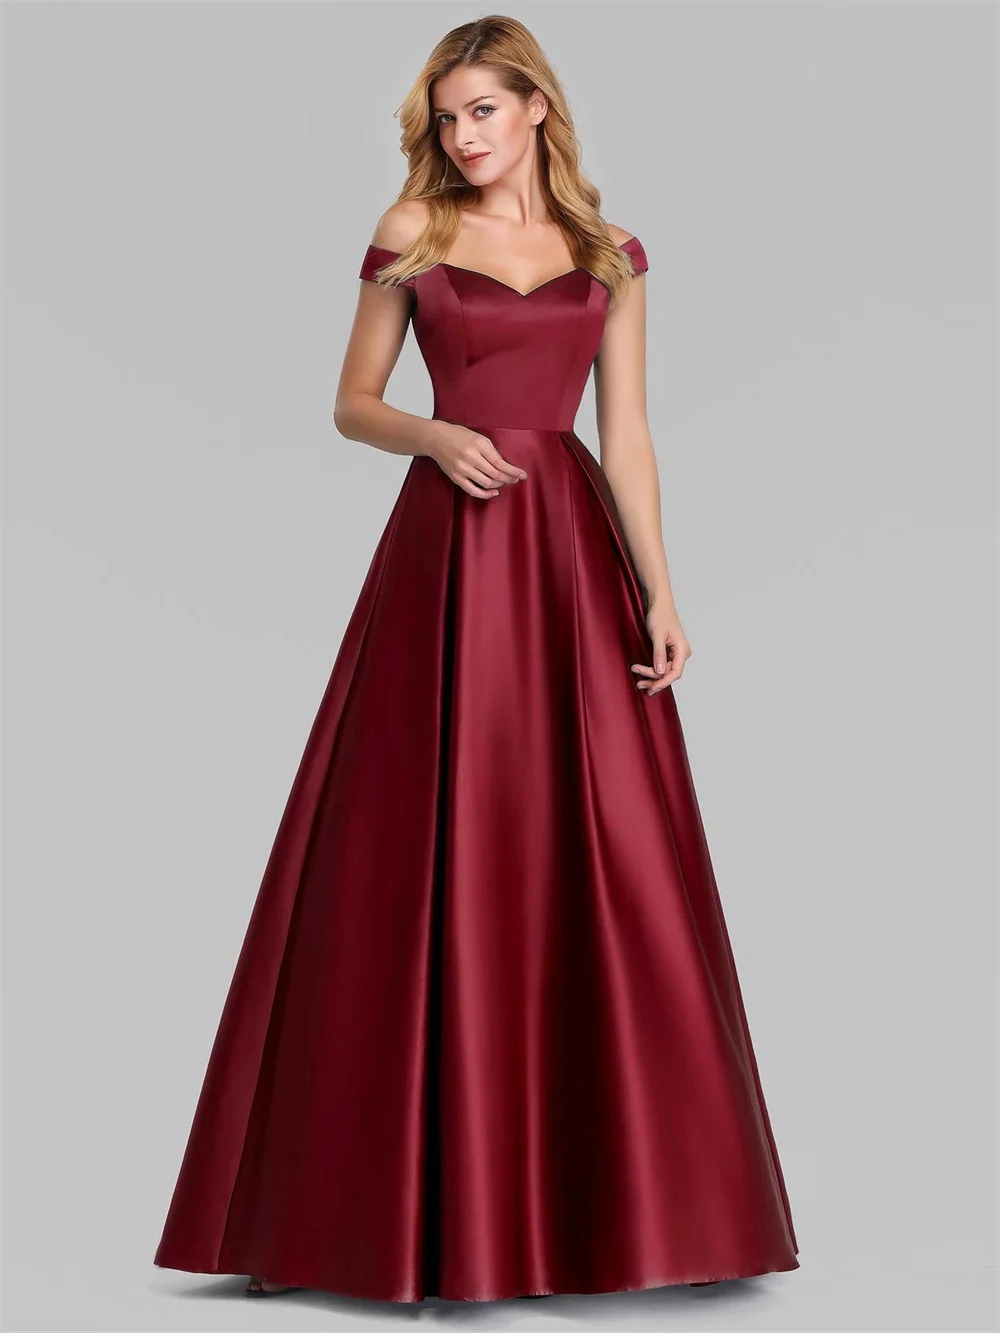 Elegant Women Evening Party Dress 2023 New in Sexy V-neck High Waist Maxi Gowns Ladies Boutique Prom Quinceanera Dresses red dresses plus size long lantern sleeve women bodycon sexy mini gowns package hip elegant ladies evening party event dress new